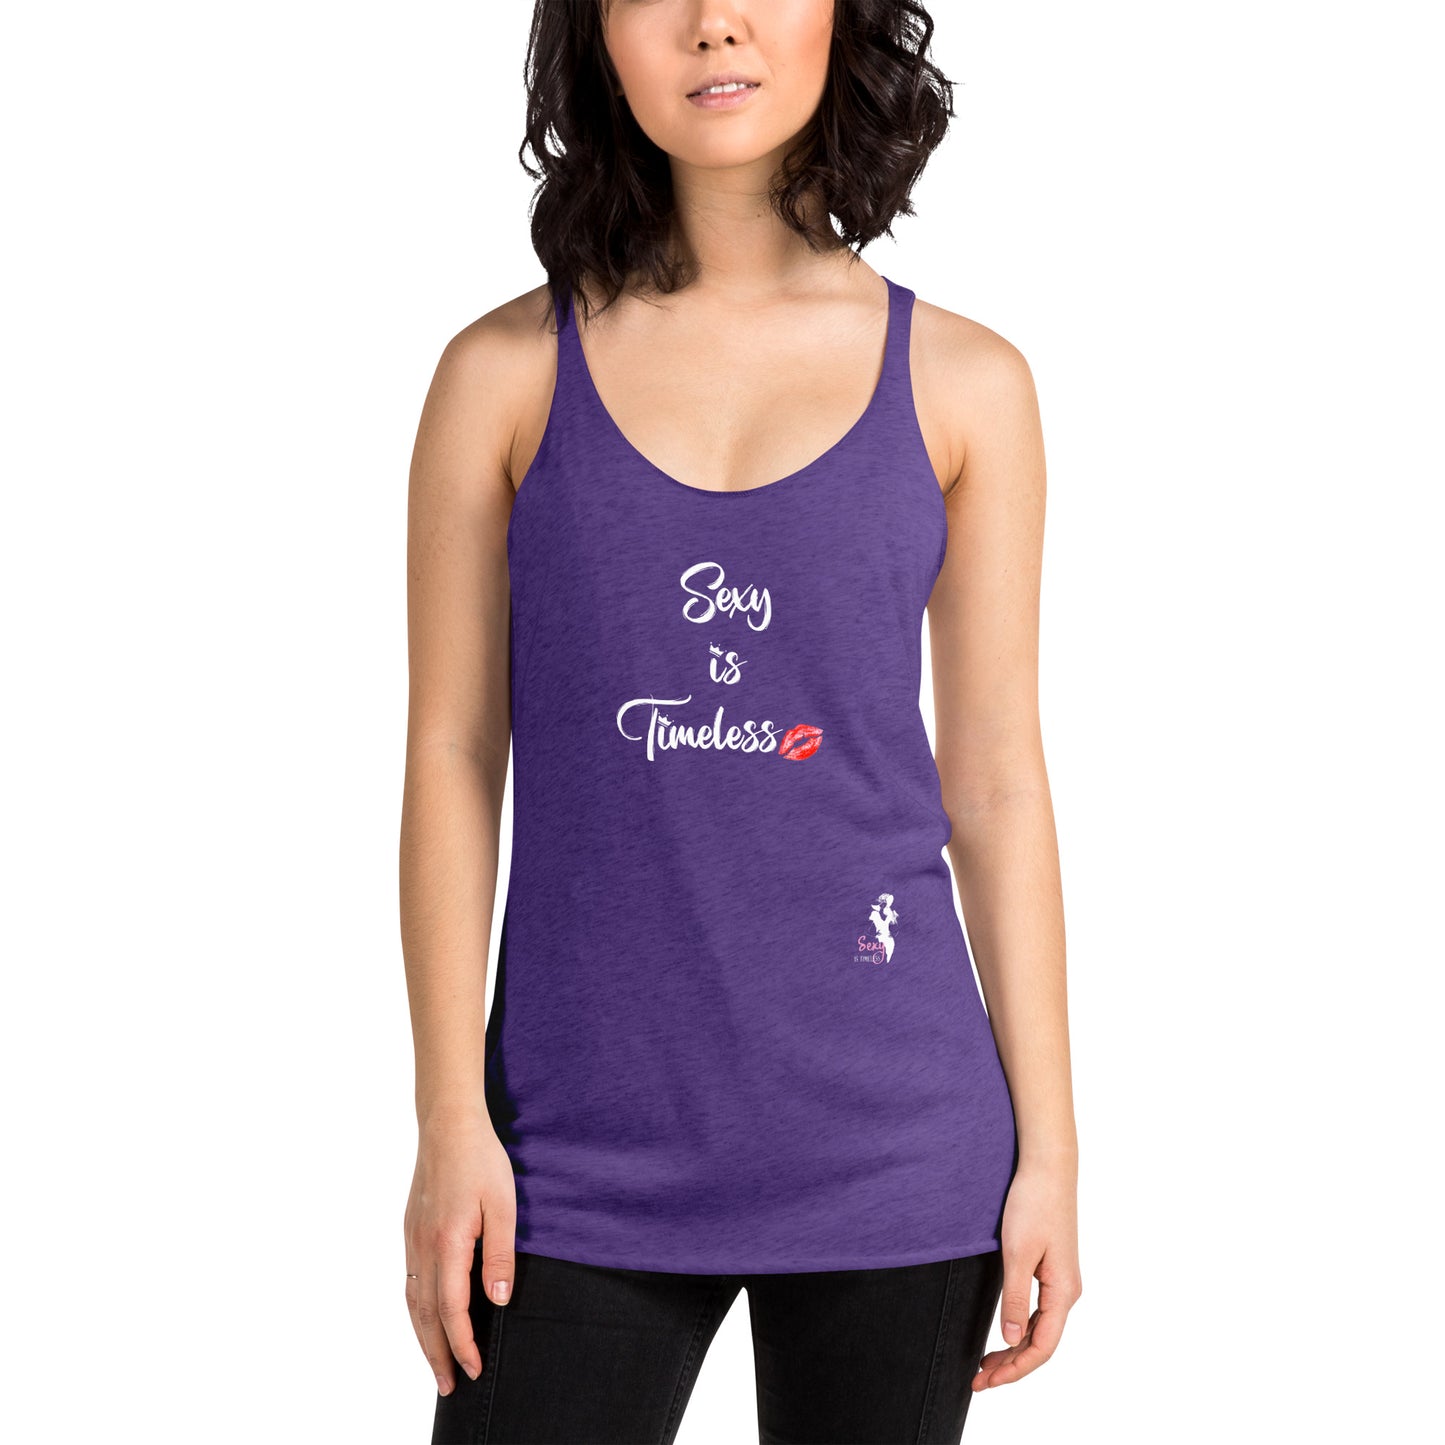 Women's Racerback Tank - Sexy is Timeless - Colors